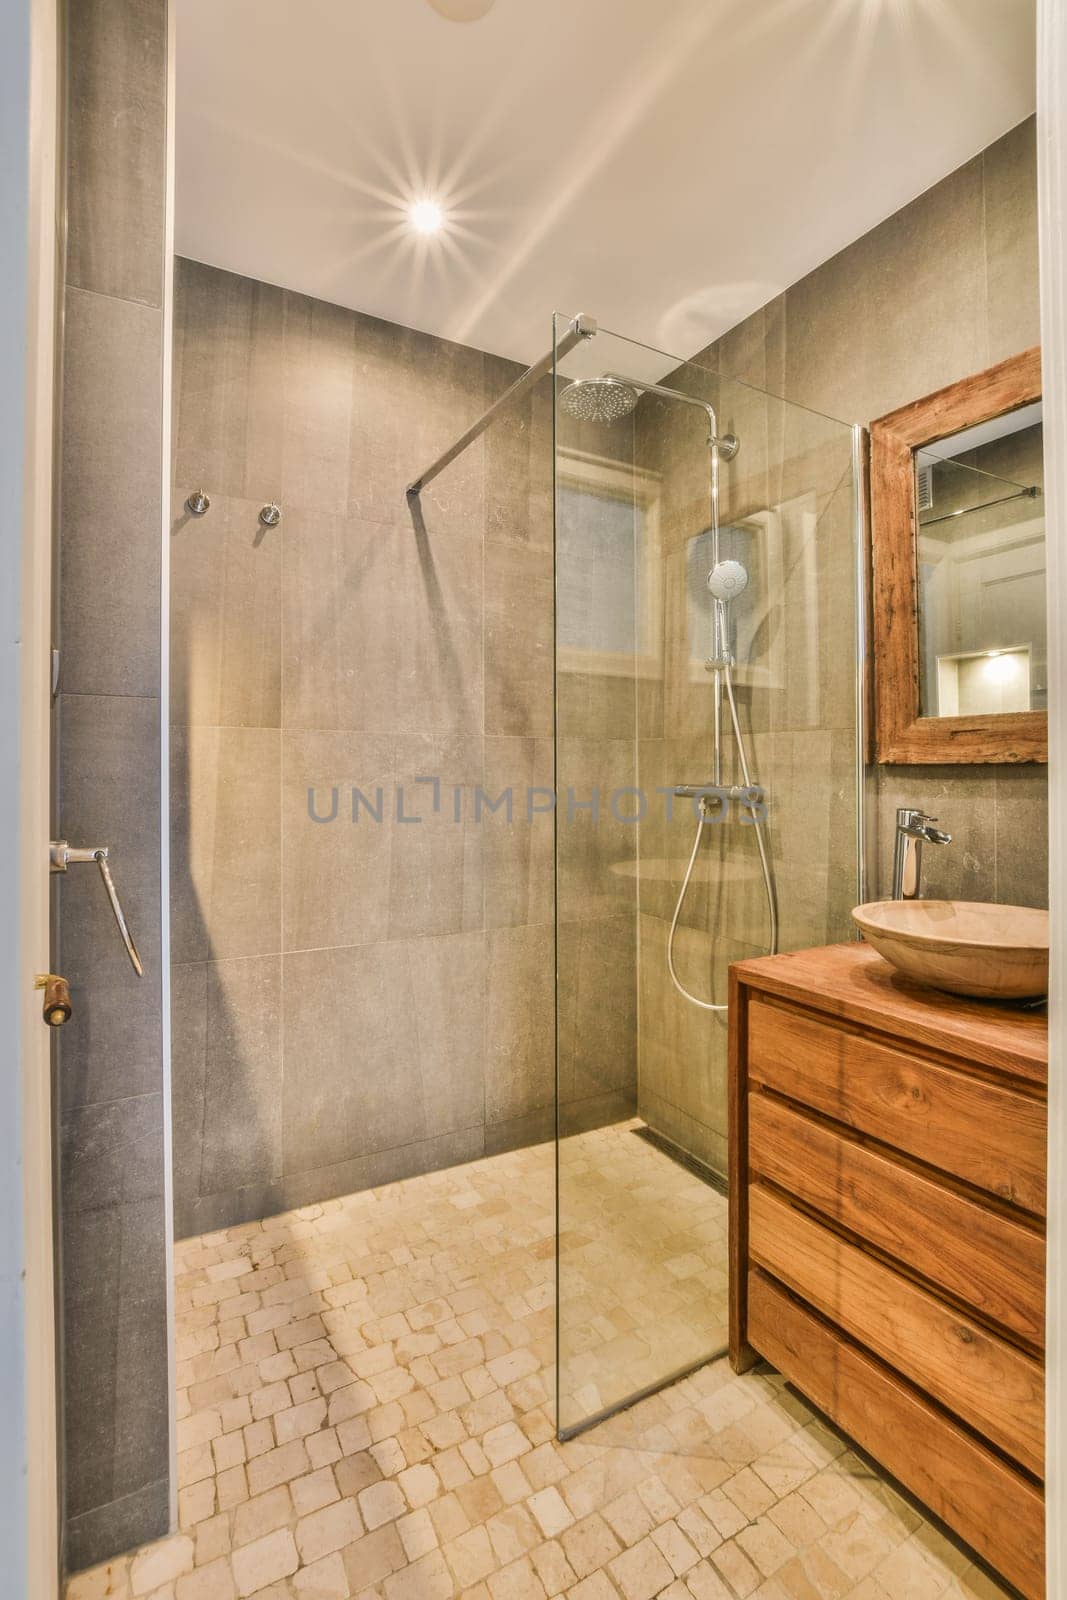 a bathroom with a wooden vanity and glass shower stall in the corner on the left is a large walk - in shower